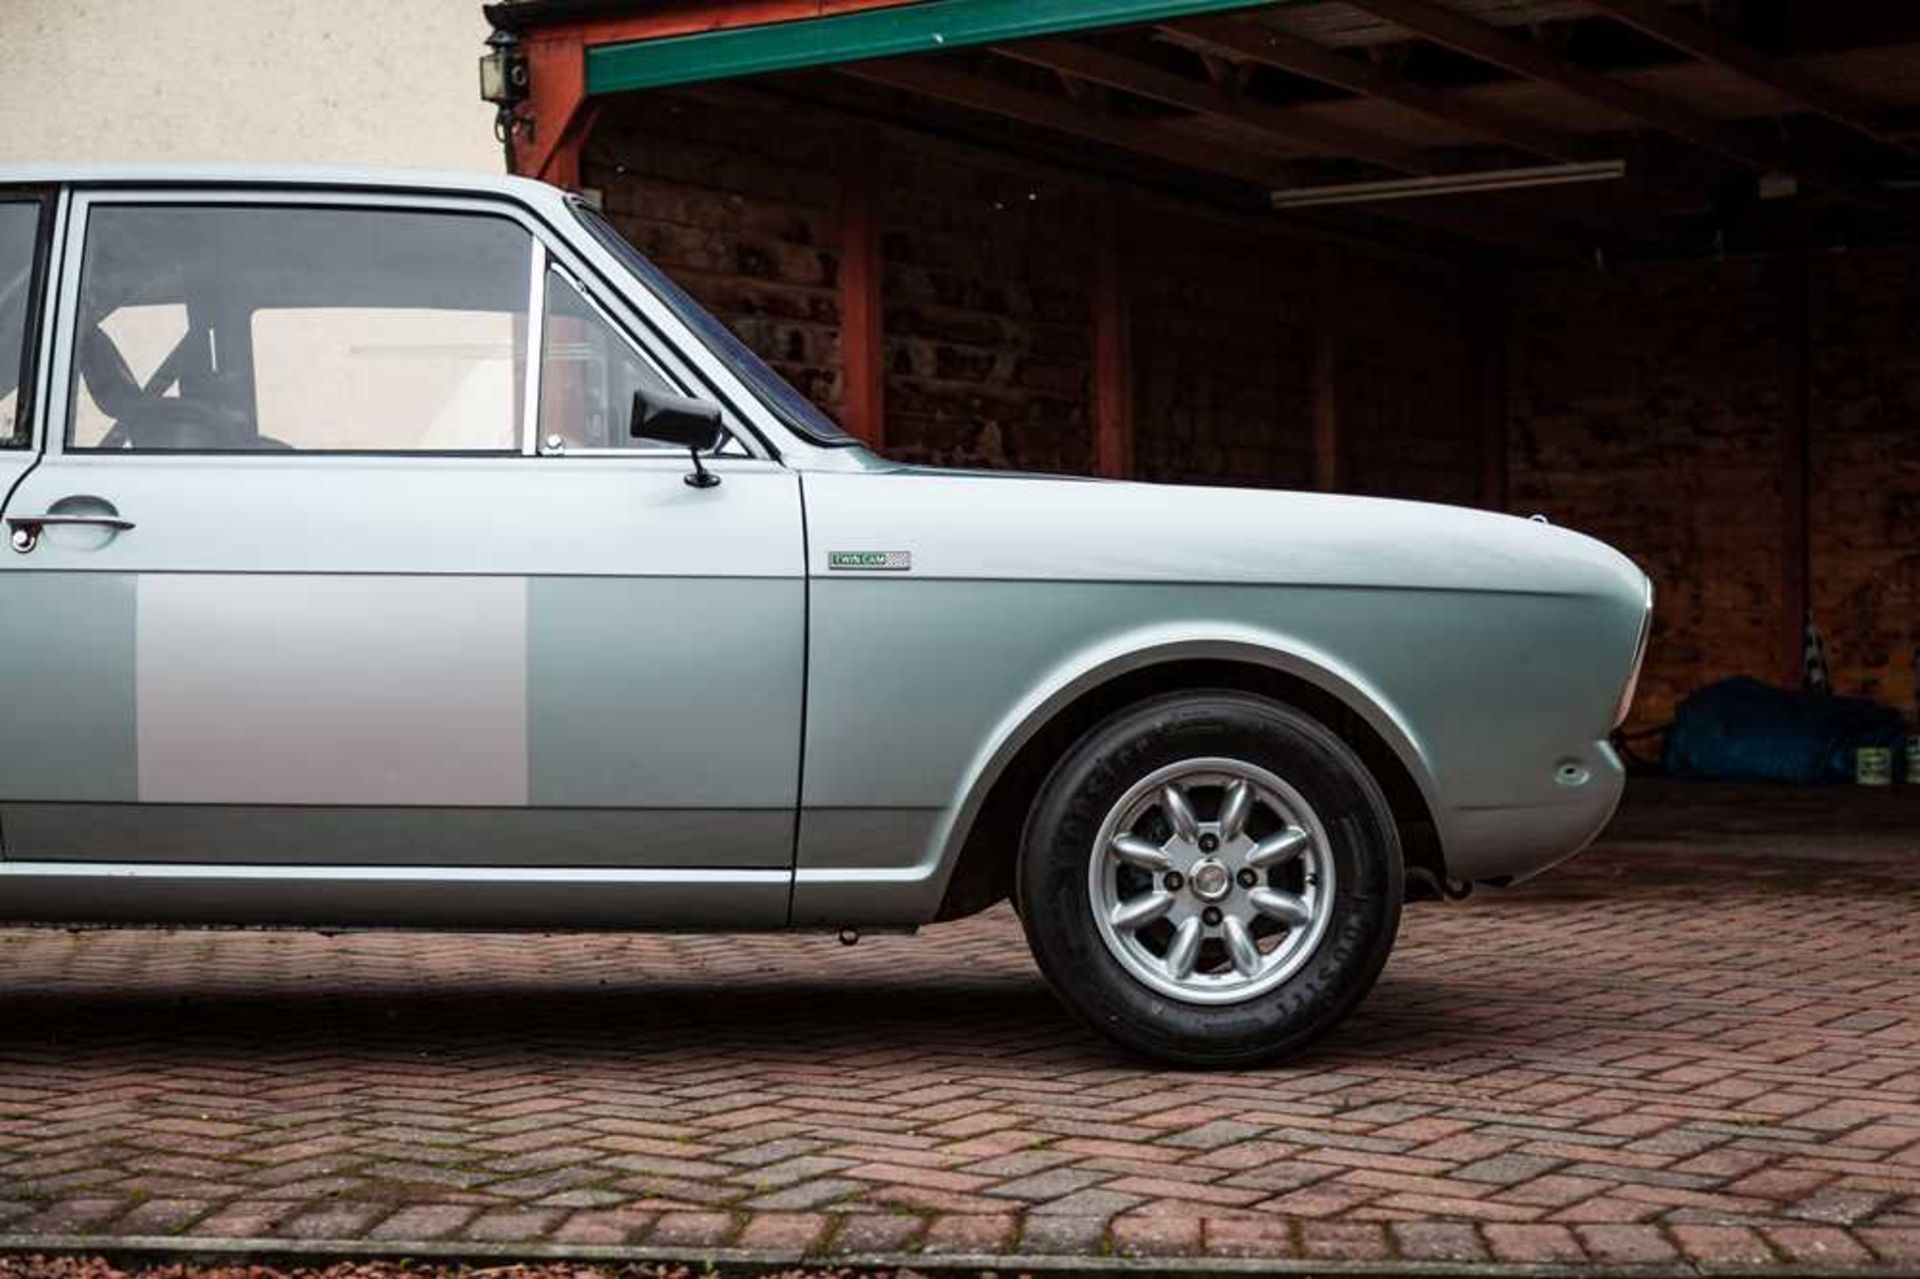 1969 Ford Cortina 'Lotus' Competition Saloon Powered by a 1598cc FIA-legal Lotus Twin-Cam with Twin - Image 15 of 55